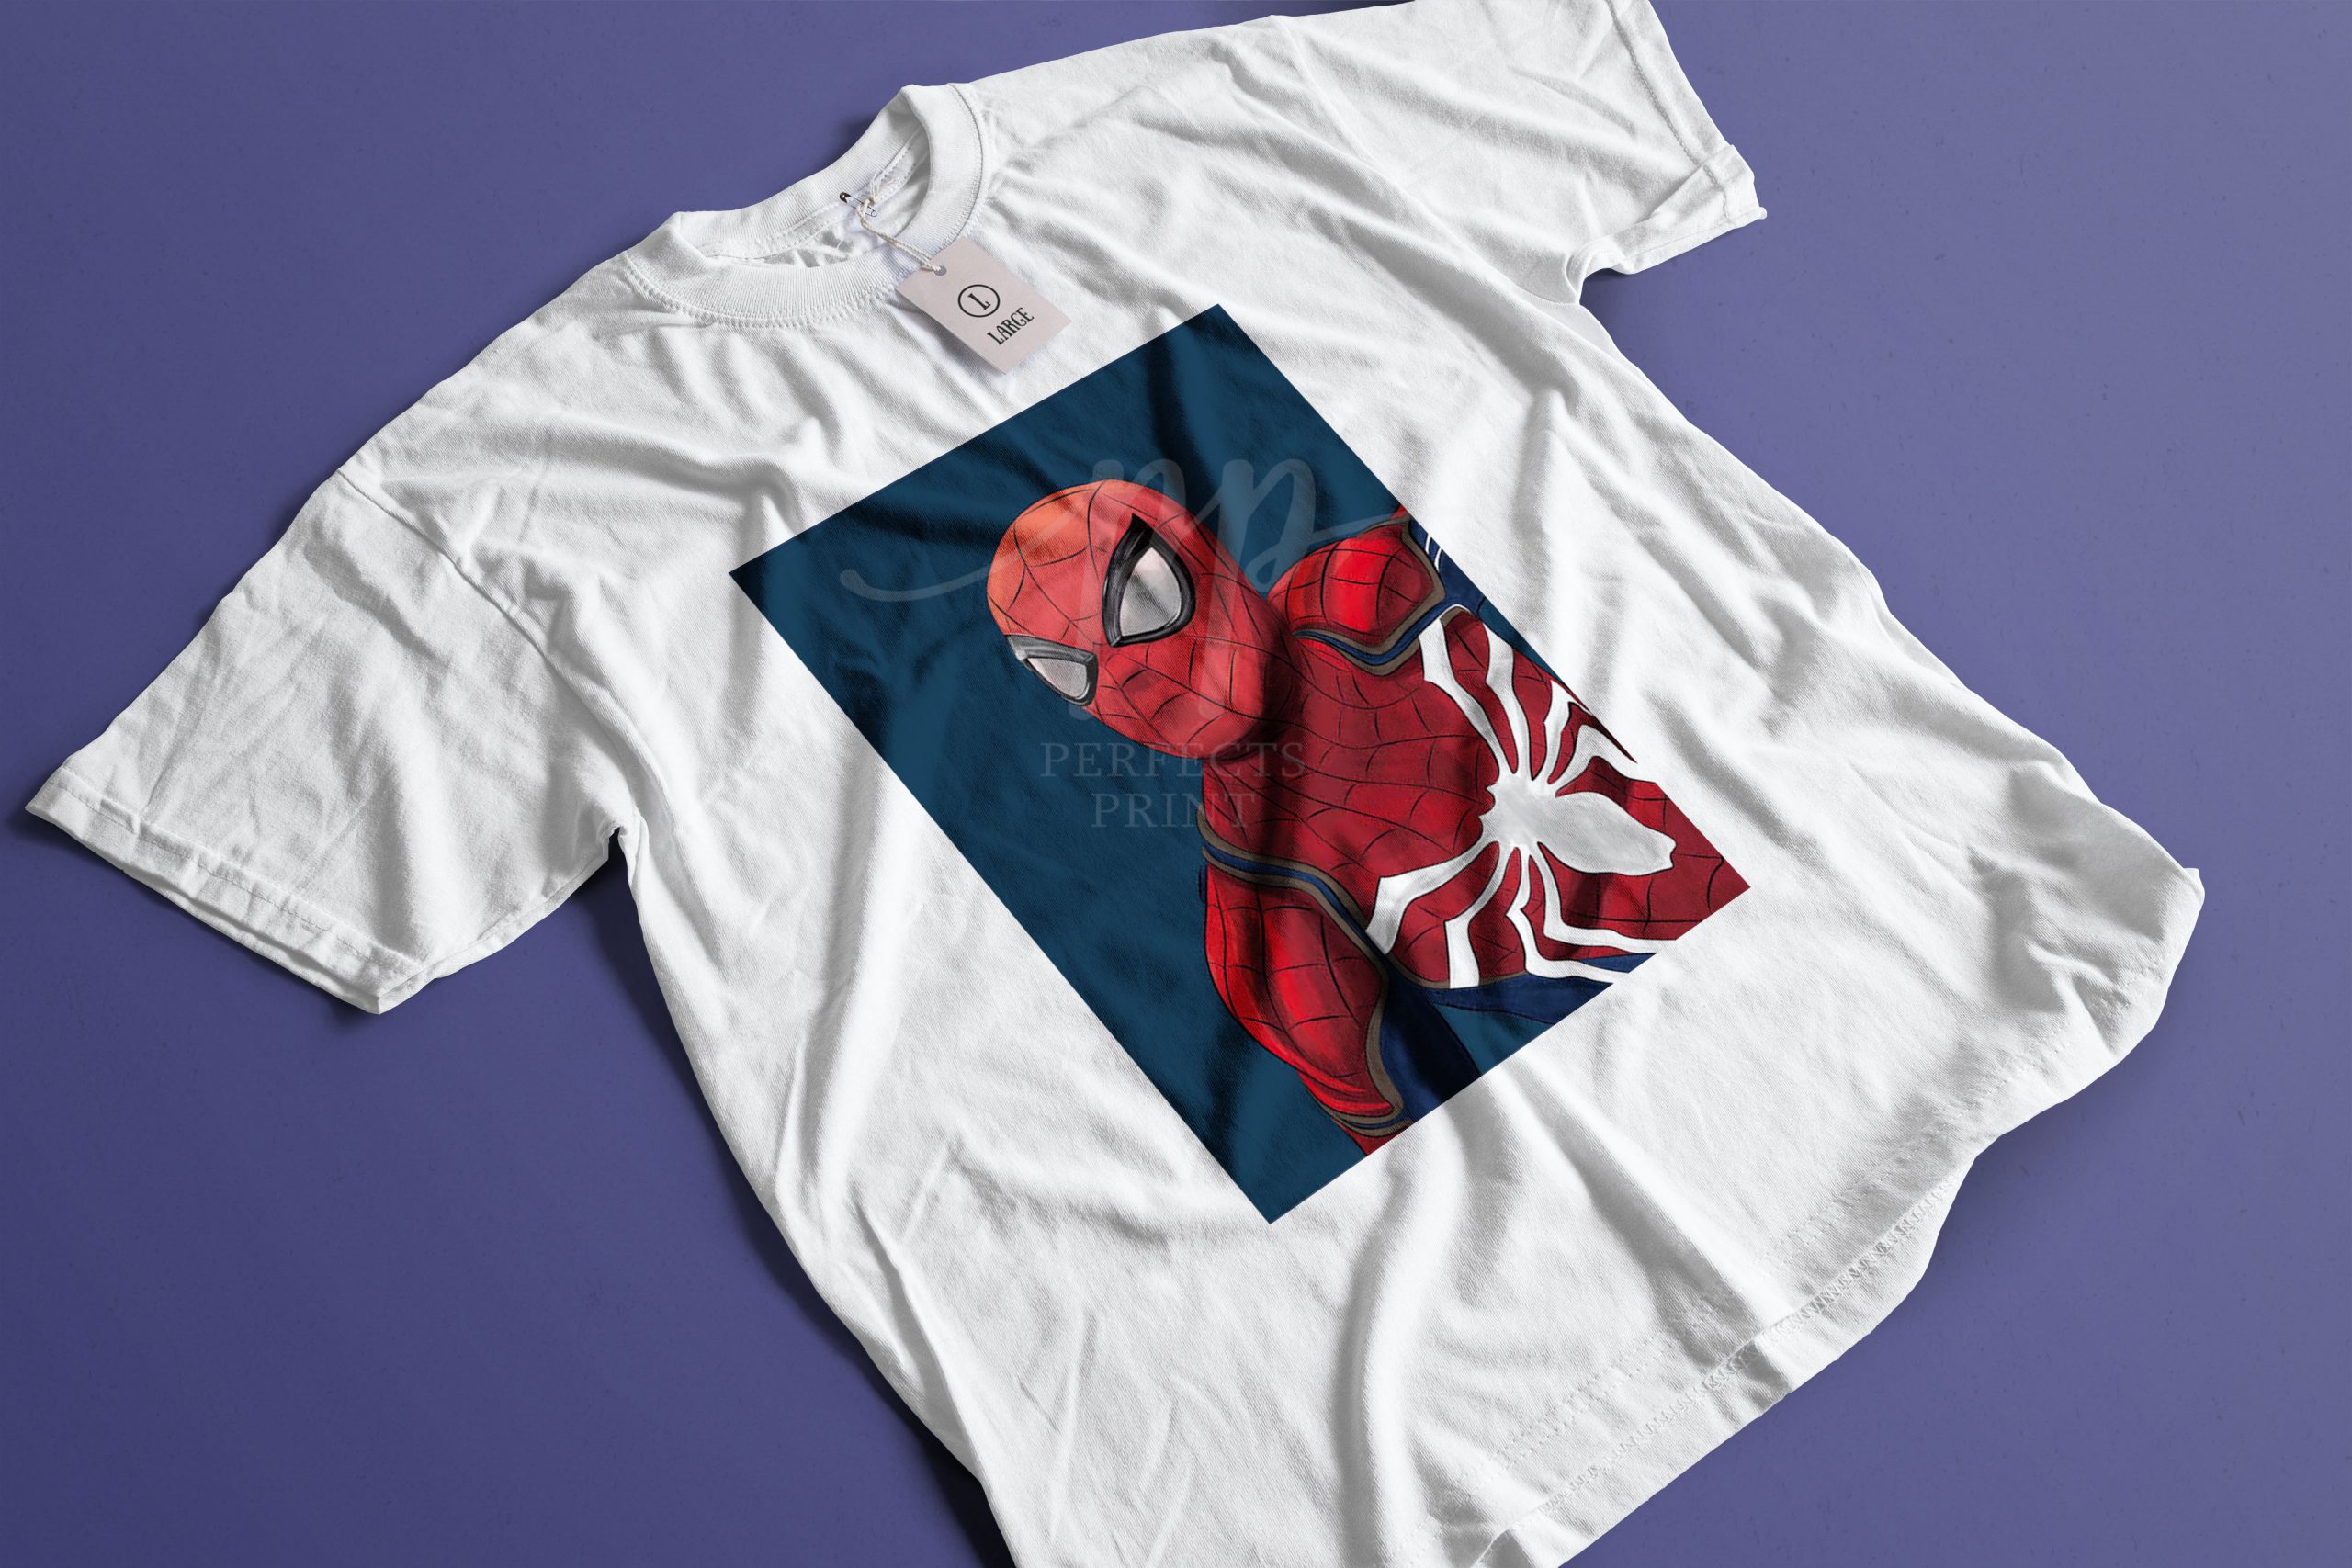 Why should you choose Spider T-Shirts?